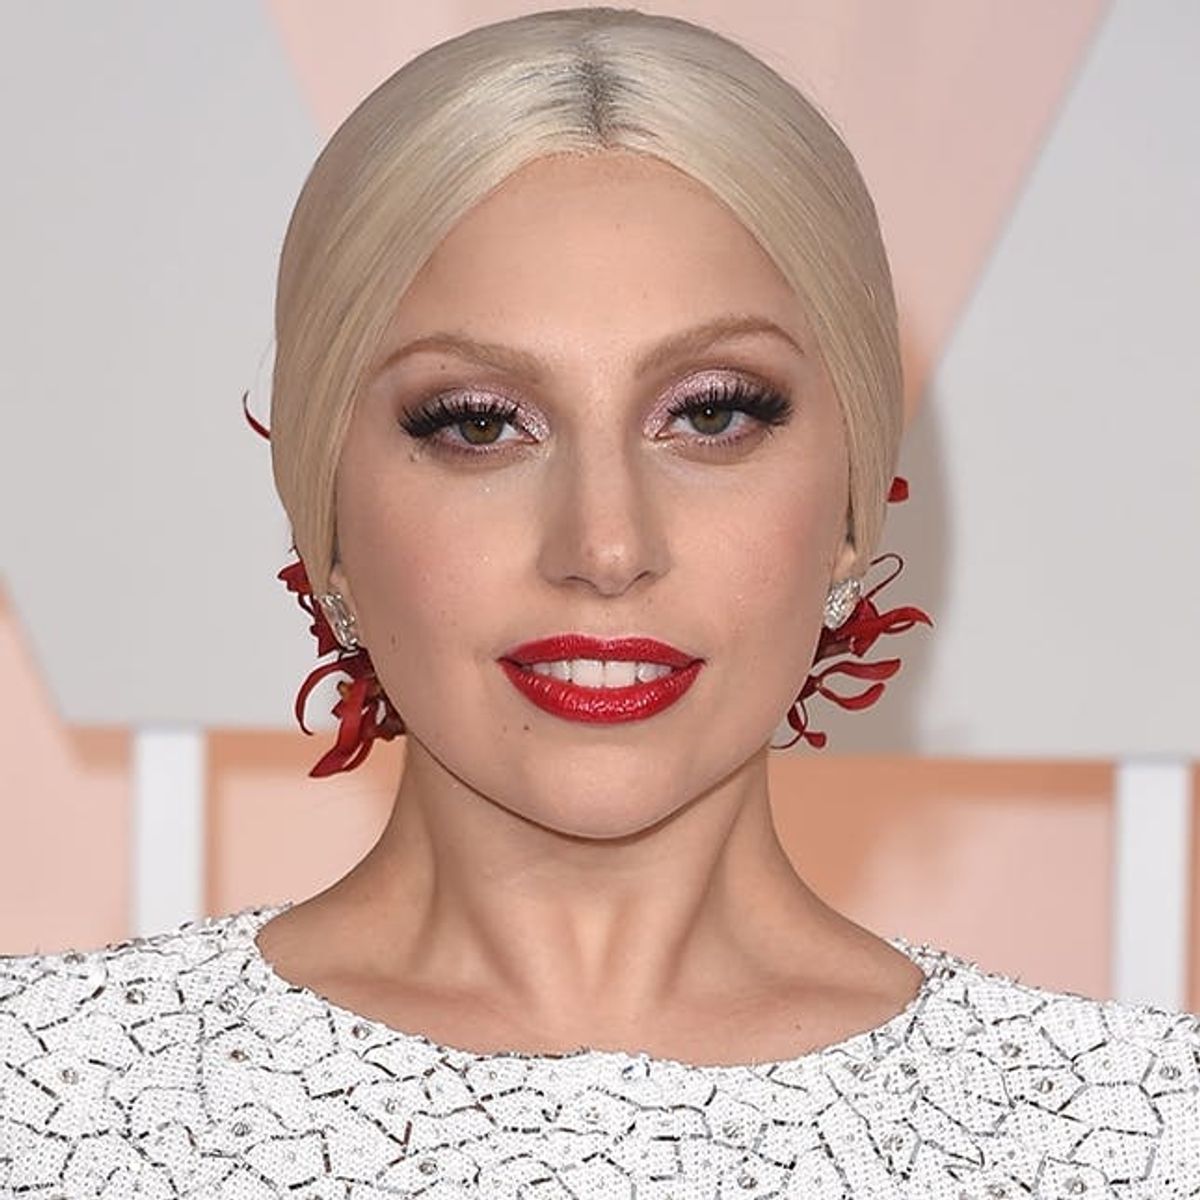 This Lady Gaga Collab Will Make Your Middle School Dreams Come True